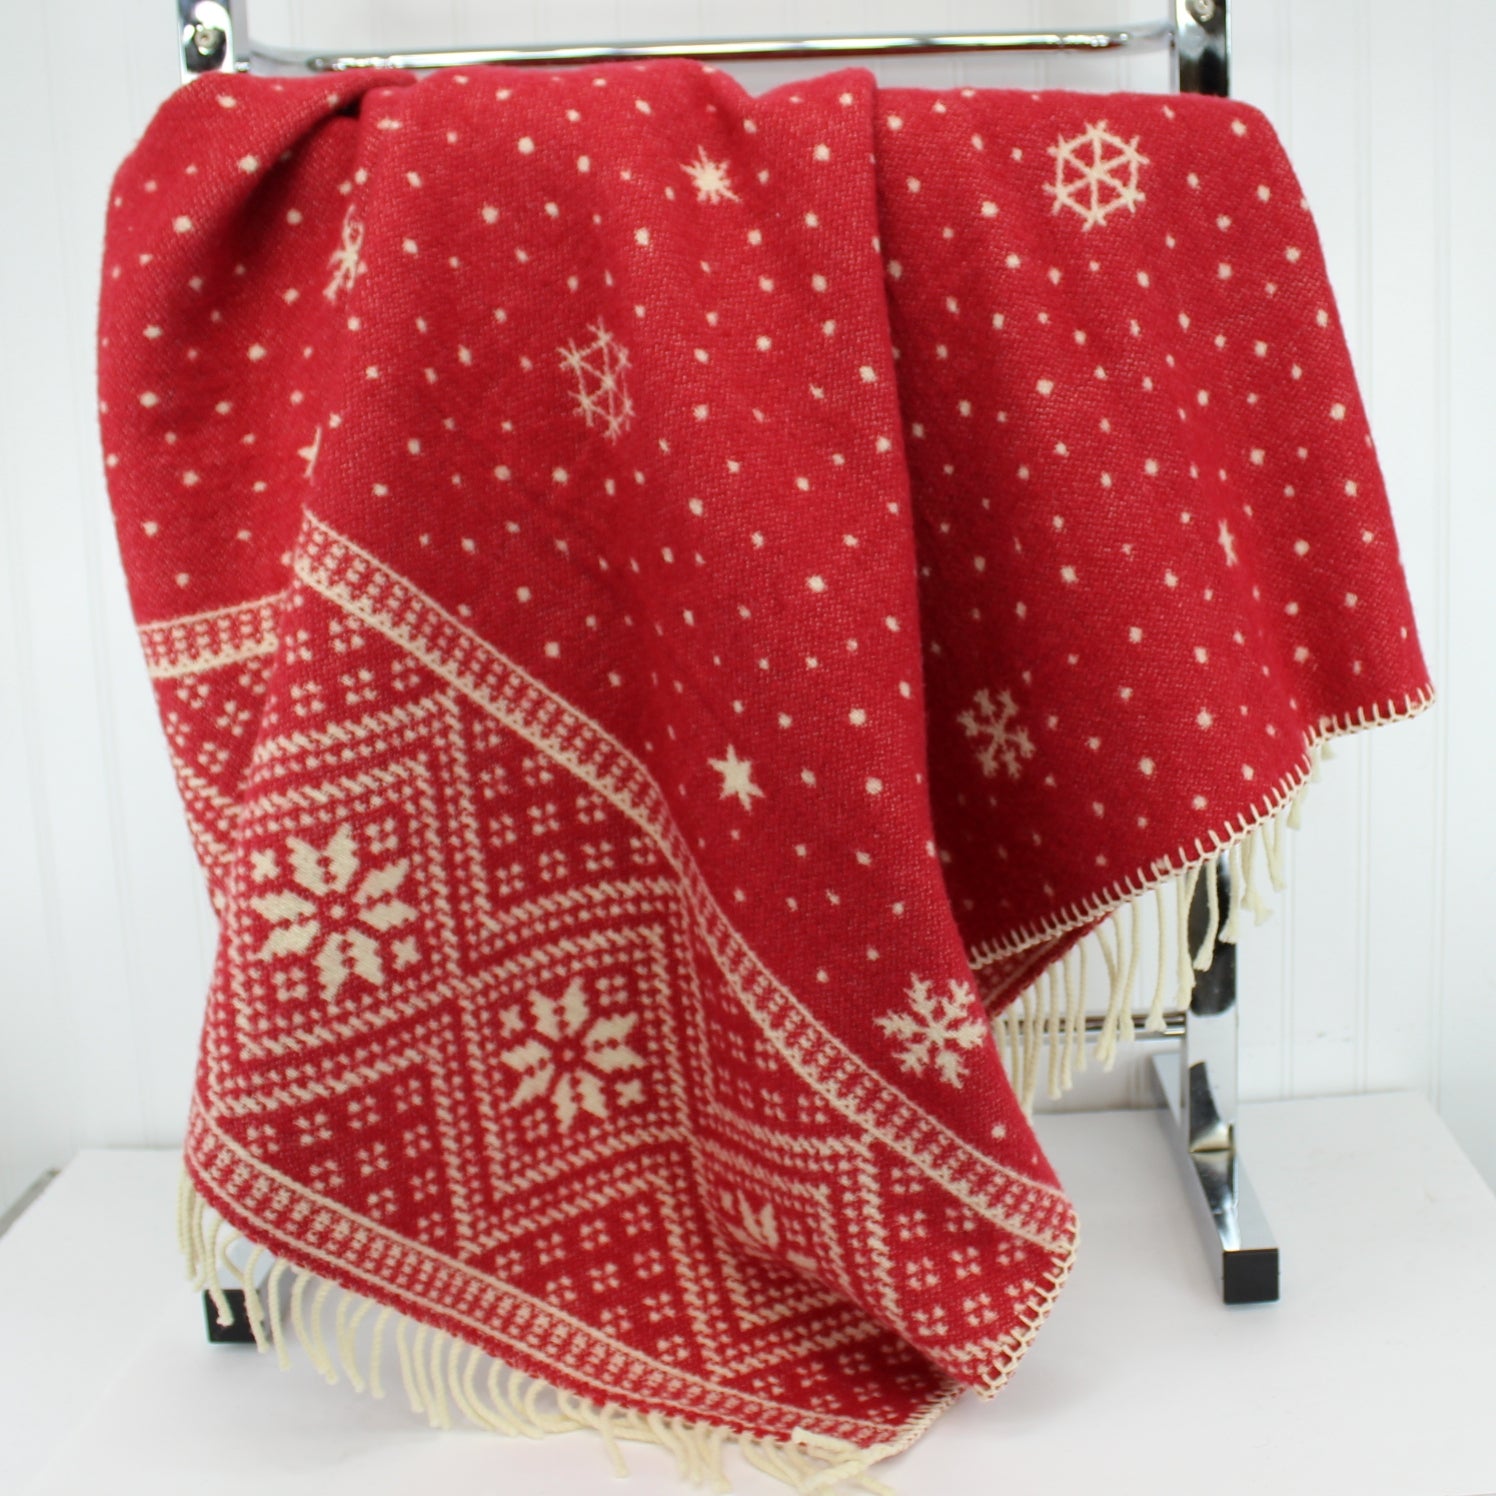 Coming Home Wool Throw Holiday Winter Snowflake Design Red White 2 Available holiday tree blanket